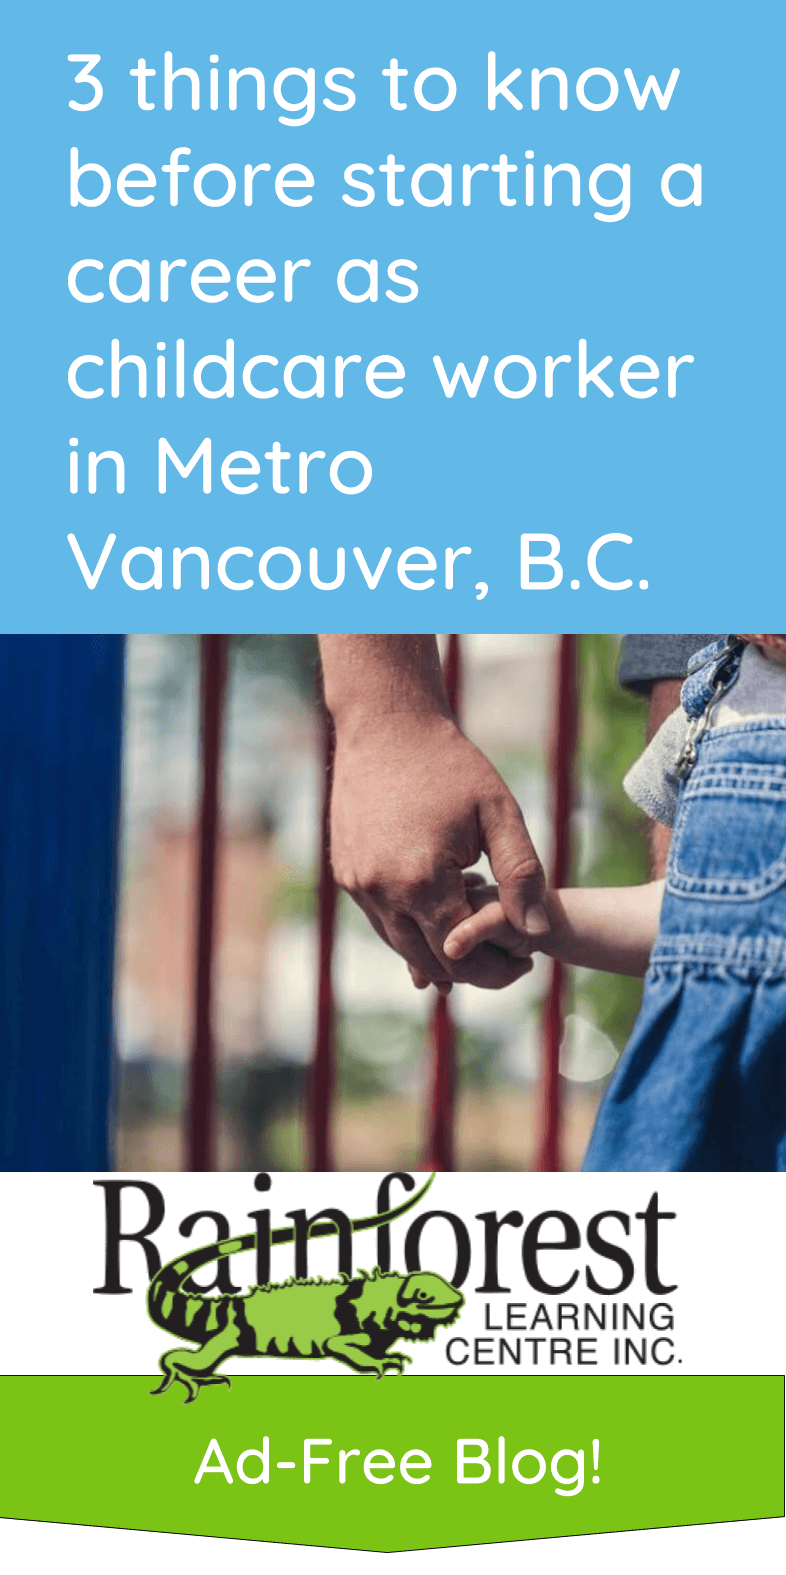 3 things to know before starting a career as childcare worker in Metro Vancouver, B.C. article - pinterest image